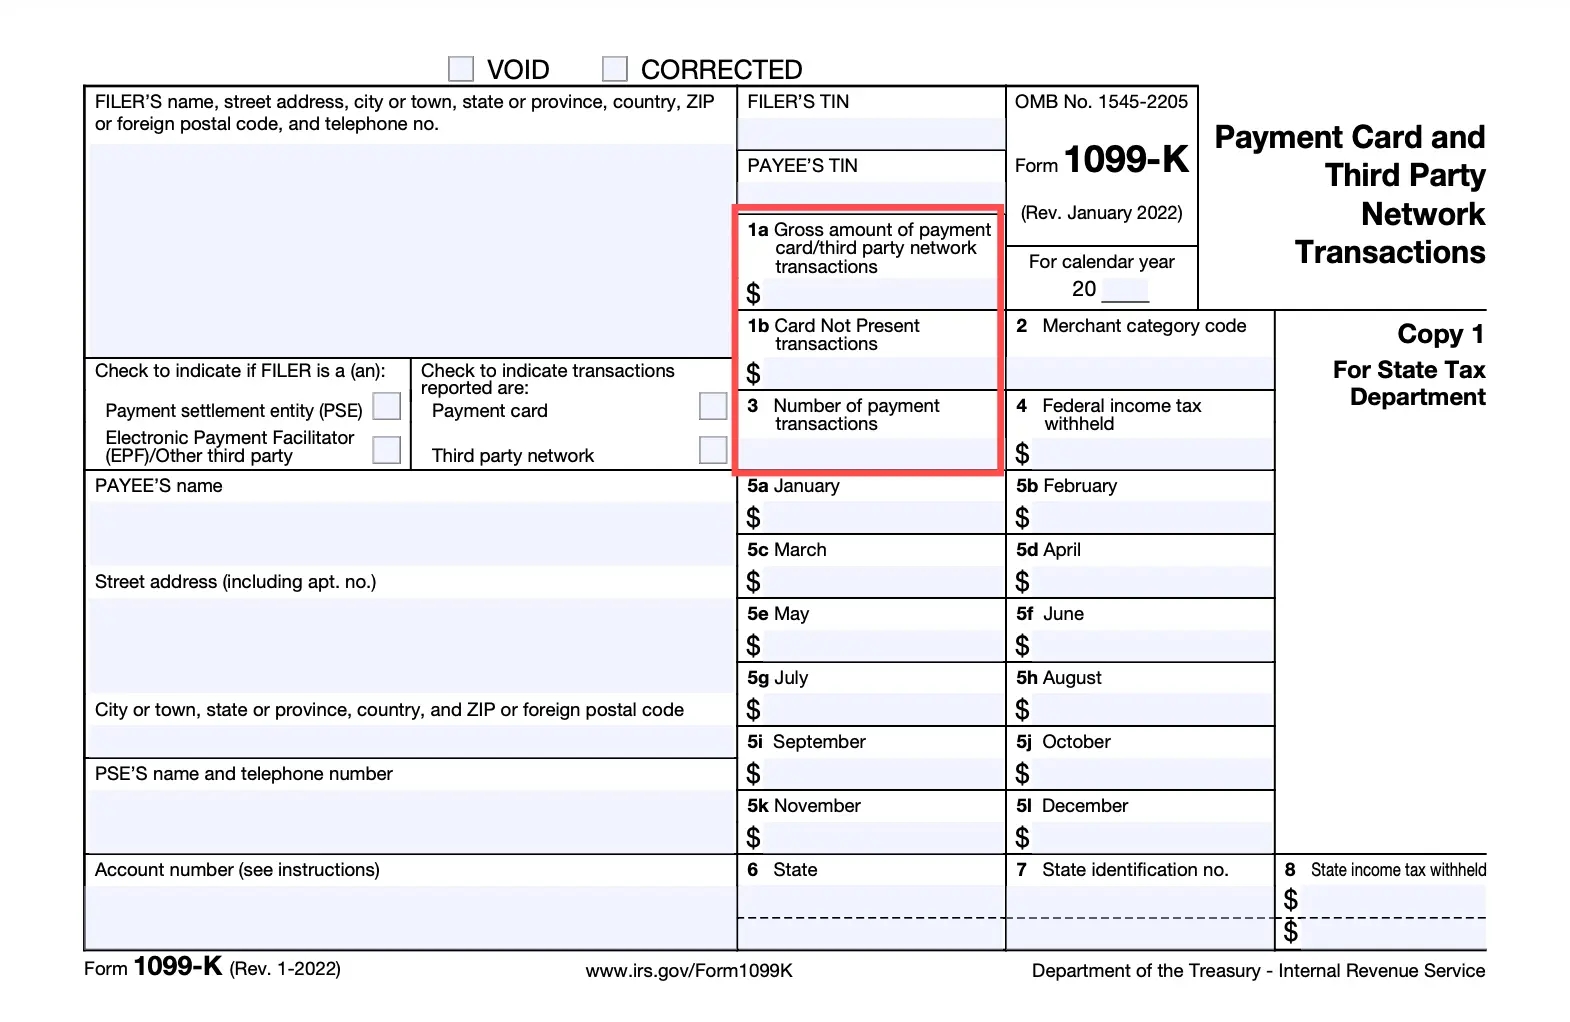 Image of Form 1099-K for payment card and third party network transactions with fields for filer's and payee's information, payment amount, and tax details. Relevant for self-employed, freelancers, and taxes.